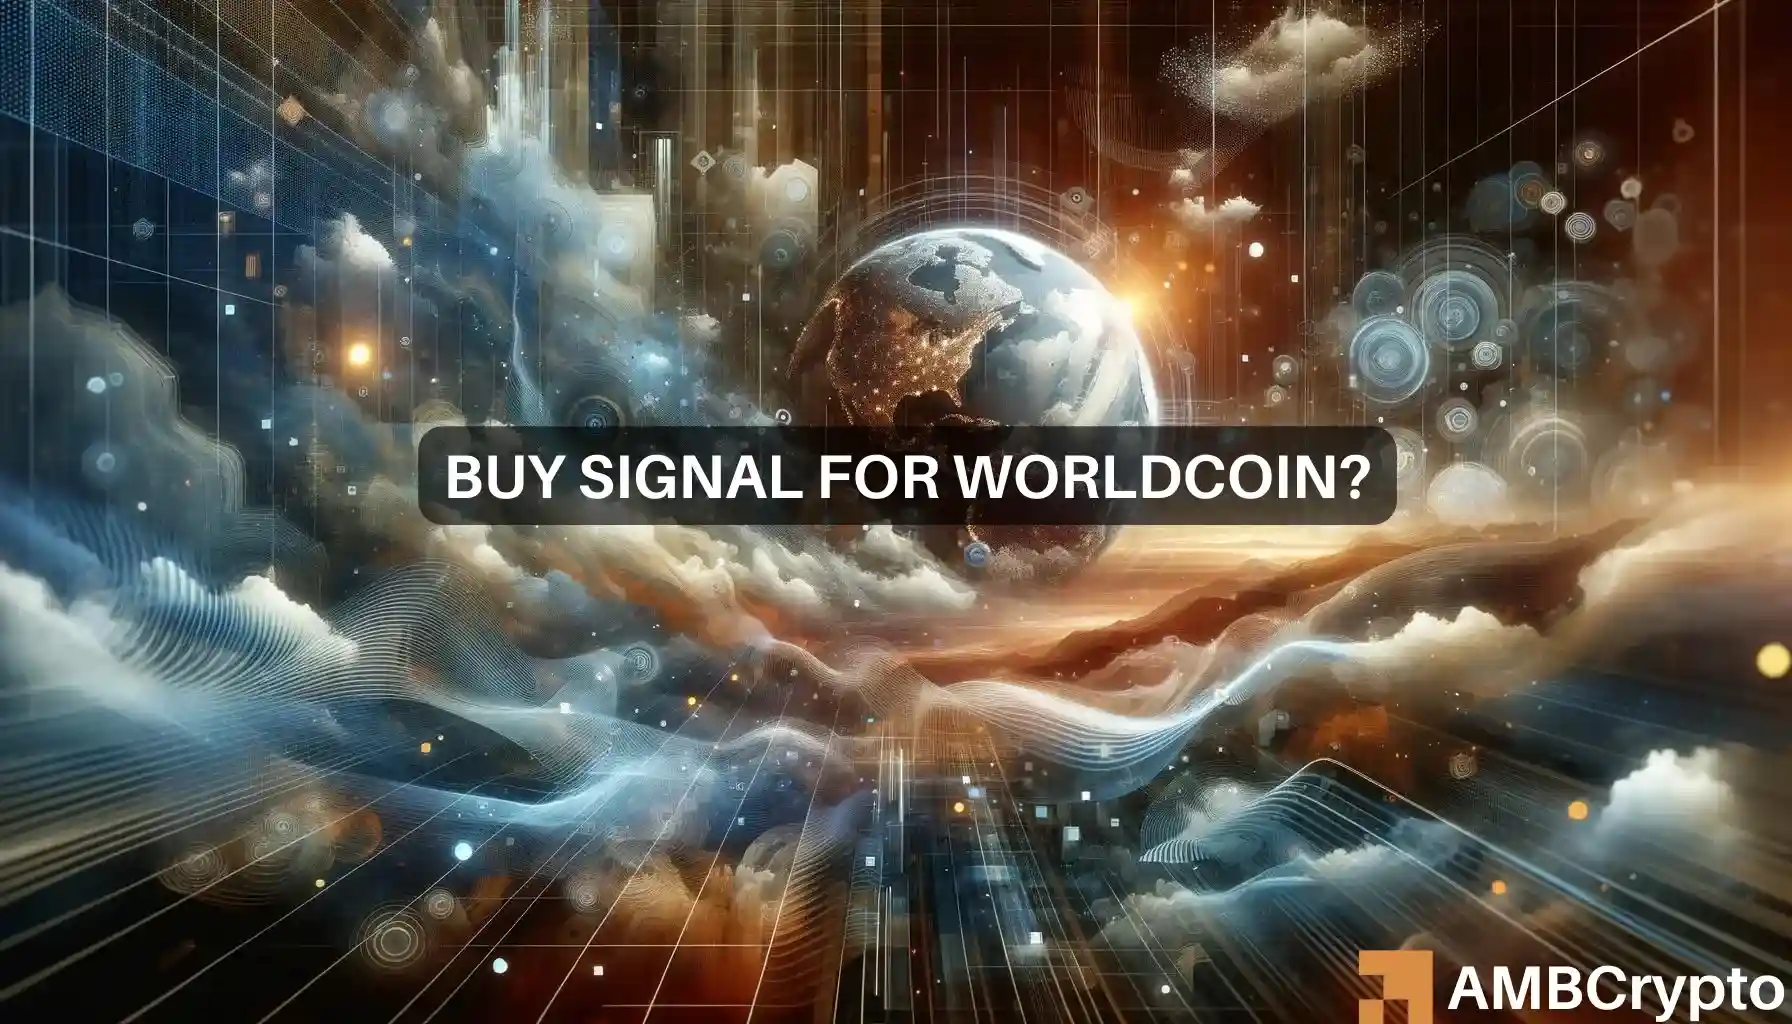 Worldcoin hits $4.7: Is a May bull run still on the cards?